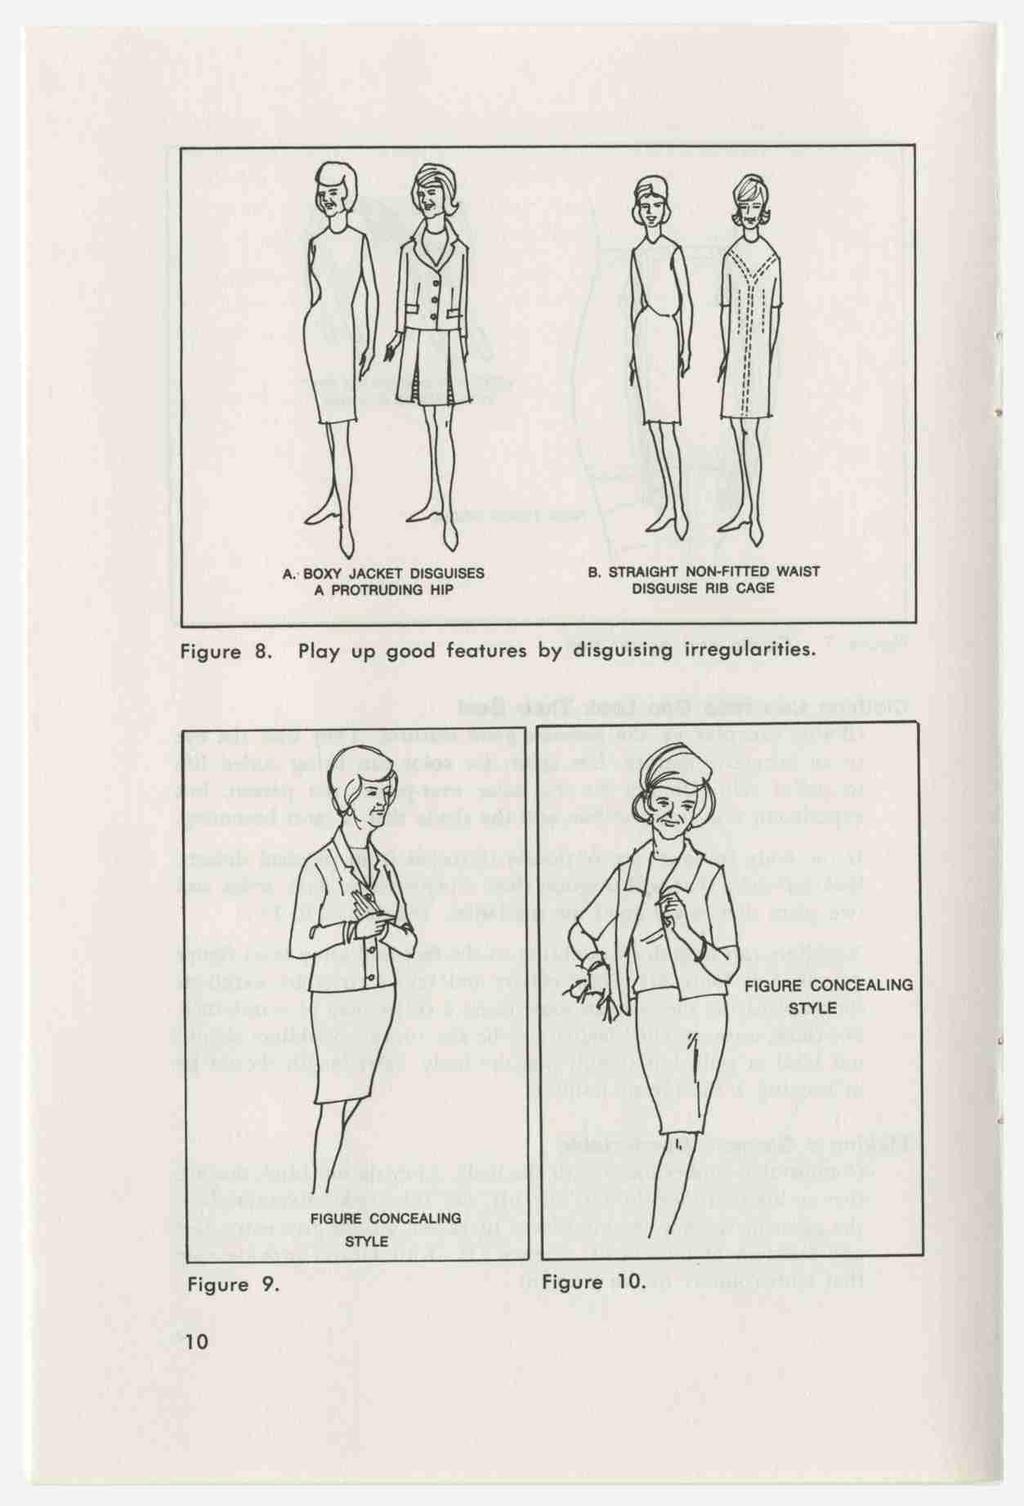 \ \\ \ - l _-:---4'./ A. BOXY JACKET DISGUISES B. STRAIGHT NON-FITTED WAIST A PROTRUDING HIP DISGUISE RIB CAGE Figure 8.